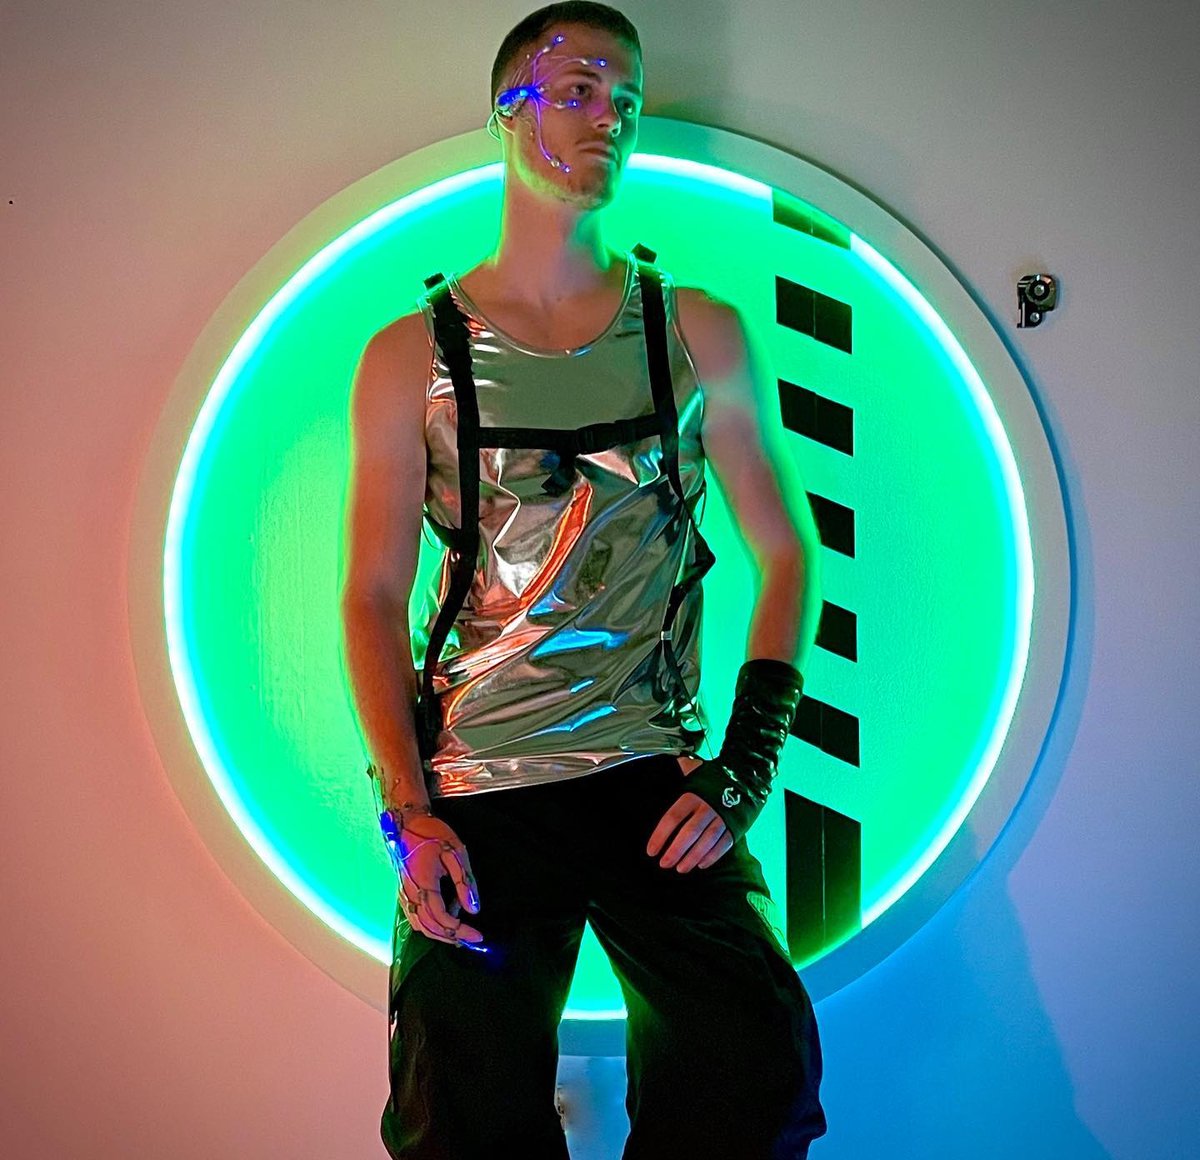 Welcome to the spaceport🚀

(#📷 @dominicelvin)

#cyberdog #camentown #futuristicfashion #cyber #cyberspace #spacefashion #chrome #spaceport #rave #ravefashion #futuristic